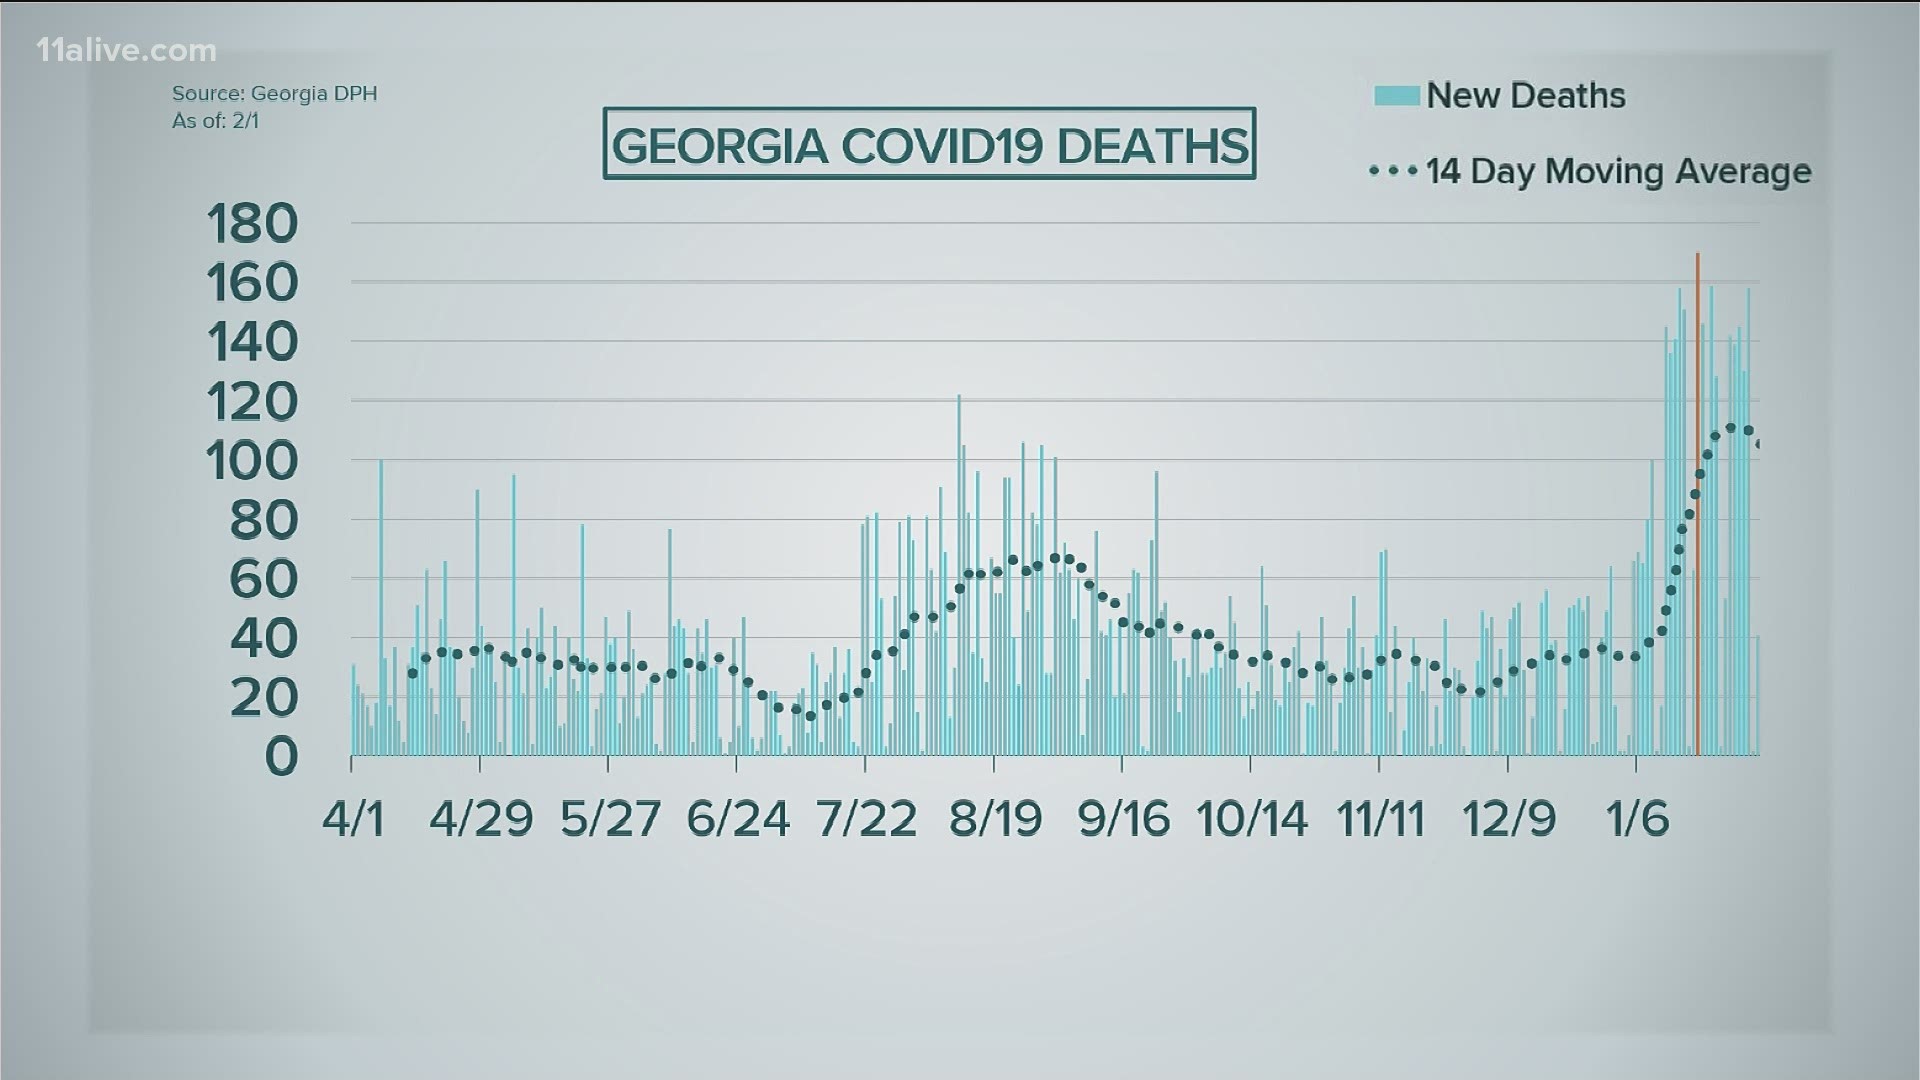 Georgia reported more than 2,500 new COVID cases on Monday. The last time we saw new cases in this rage was mid-August and late-October last year.